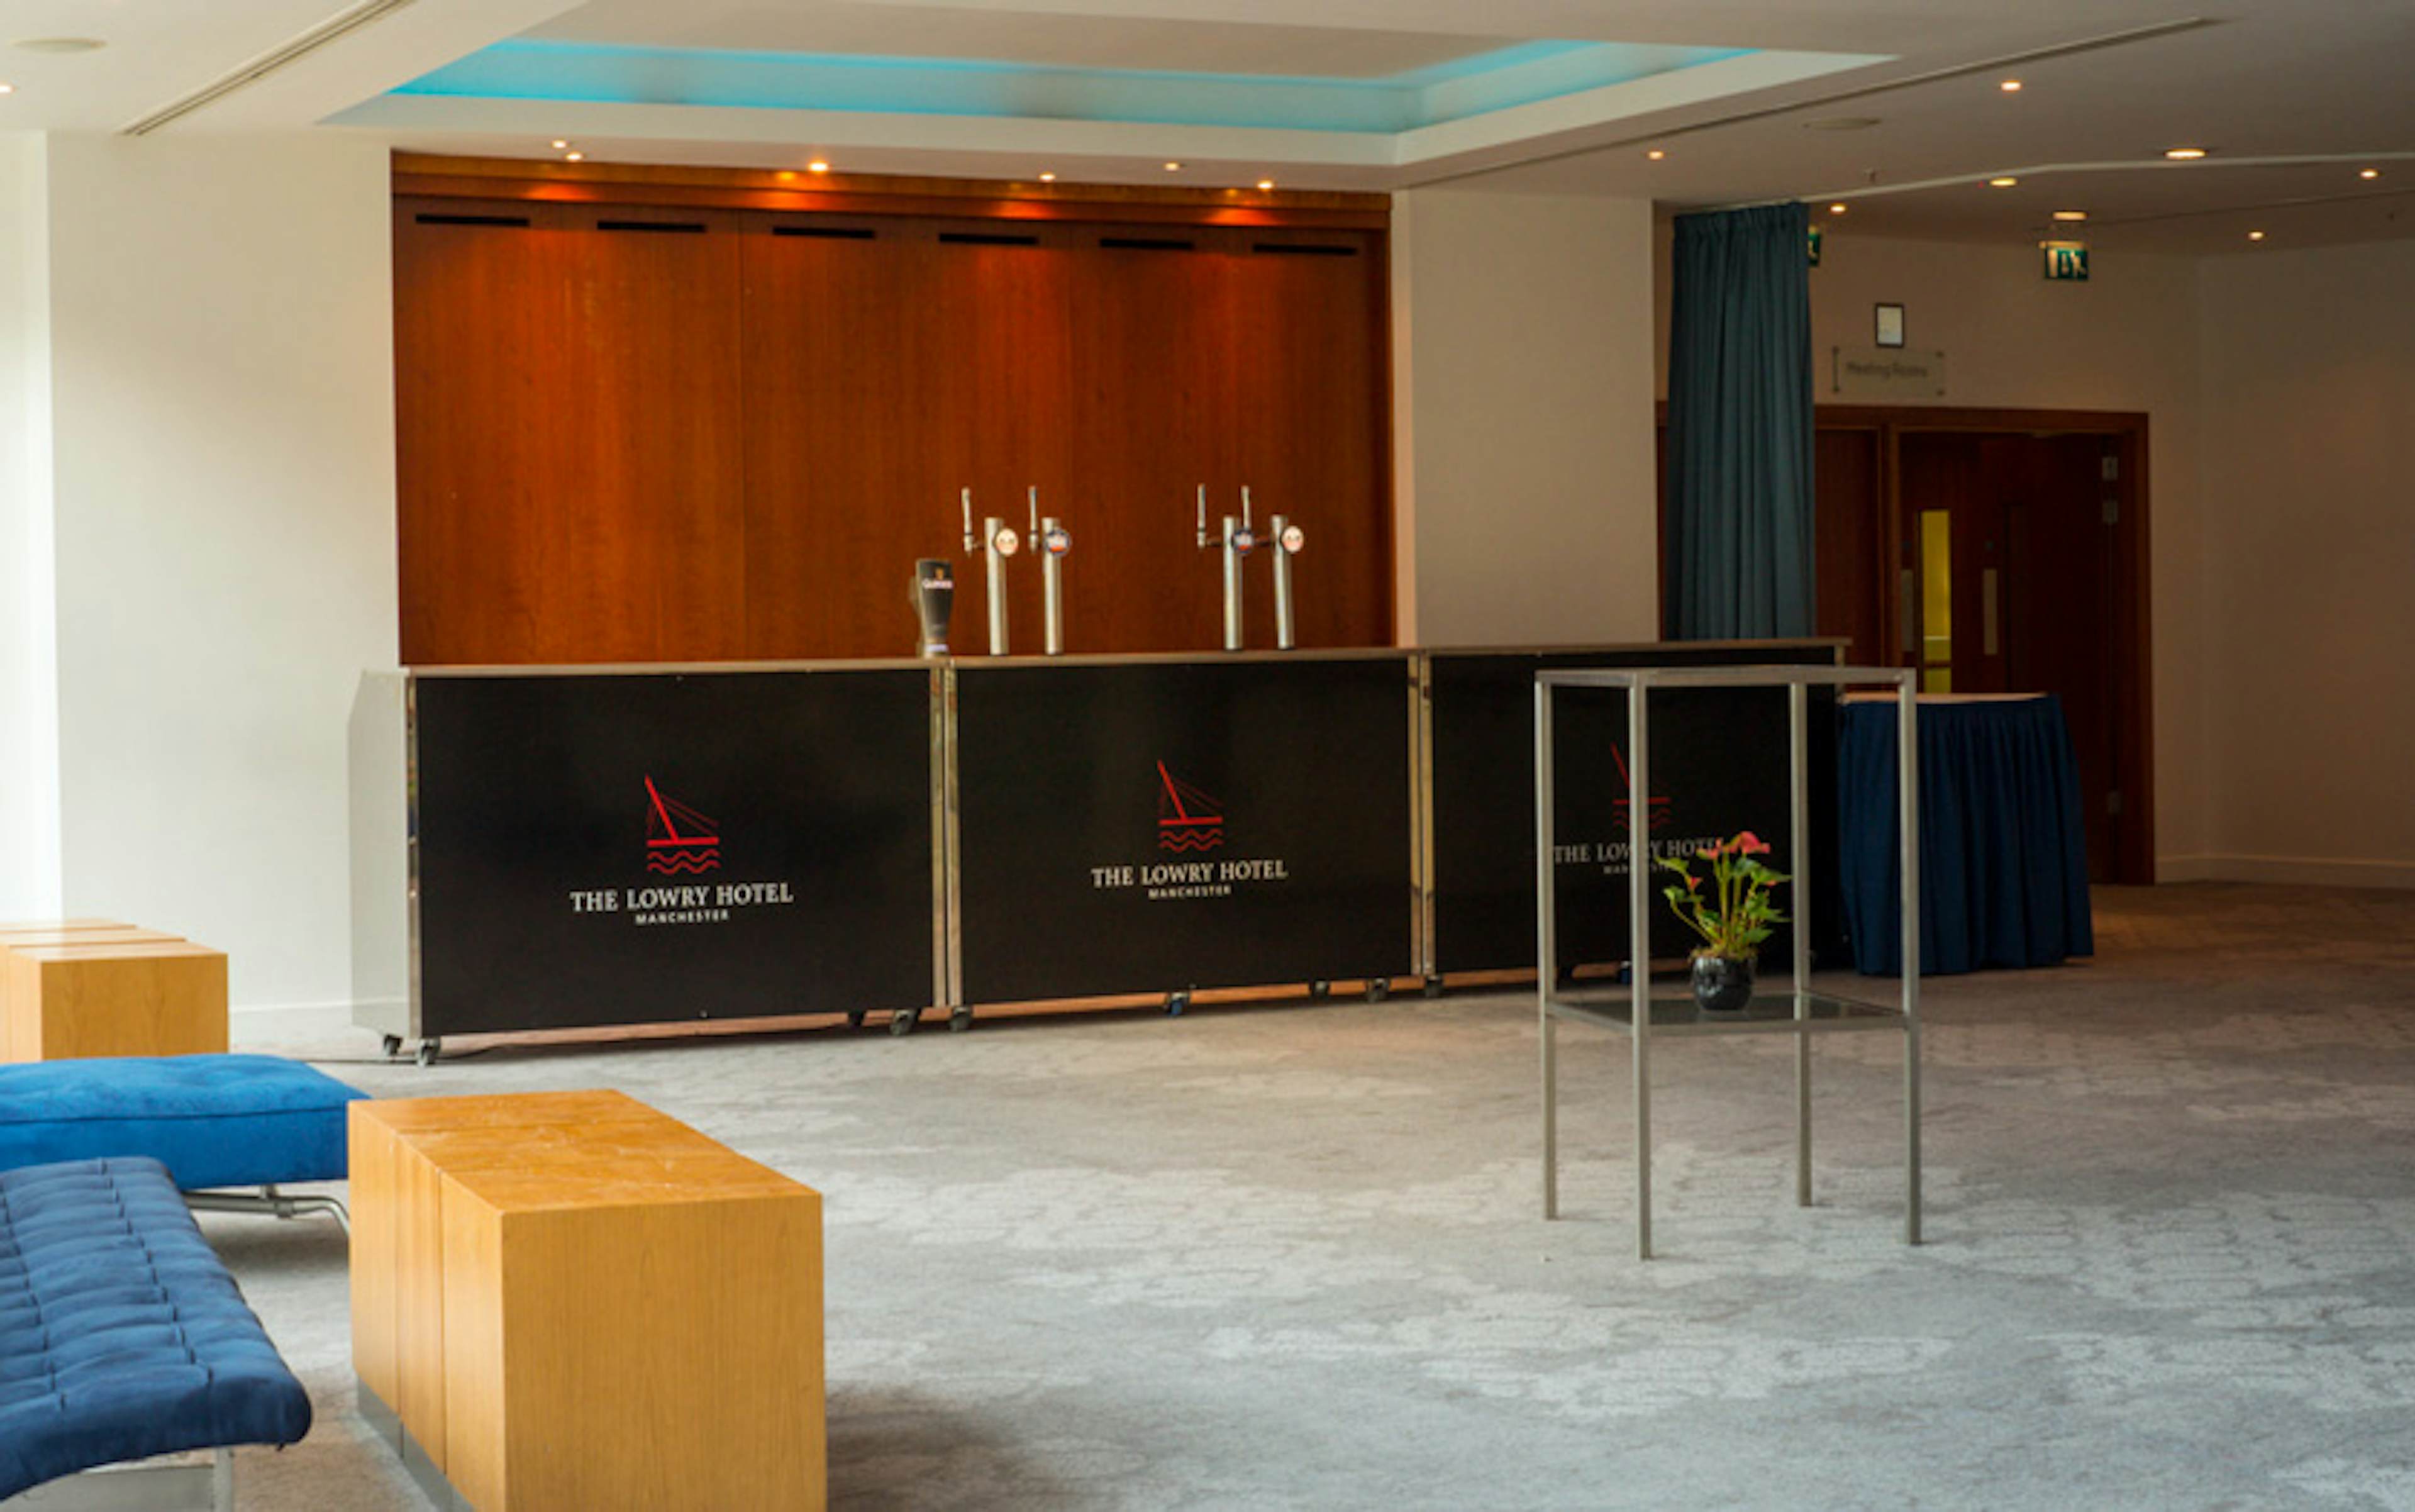 The Lowry Hotel - Pre-Function Areas only for Grand Ball, BR1 &BR2 image 1